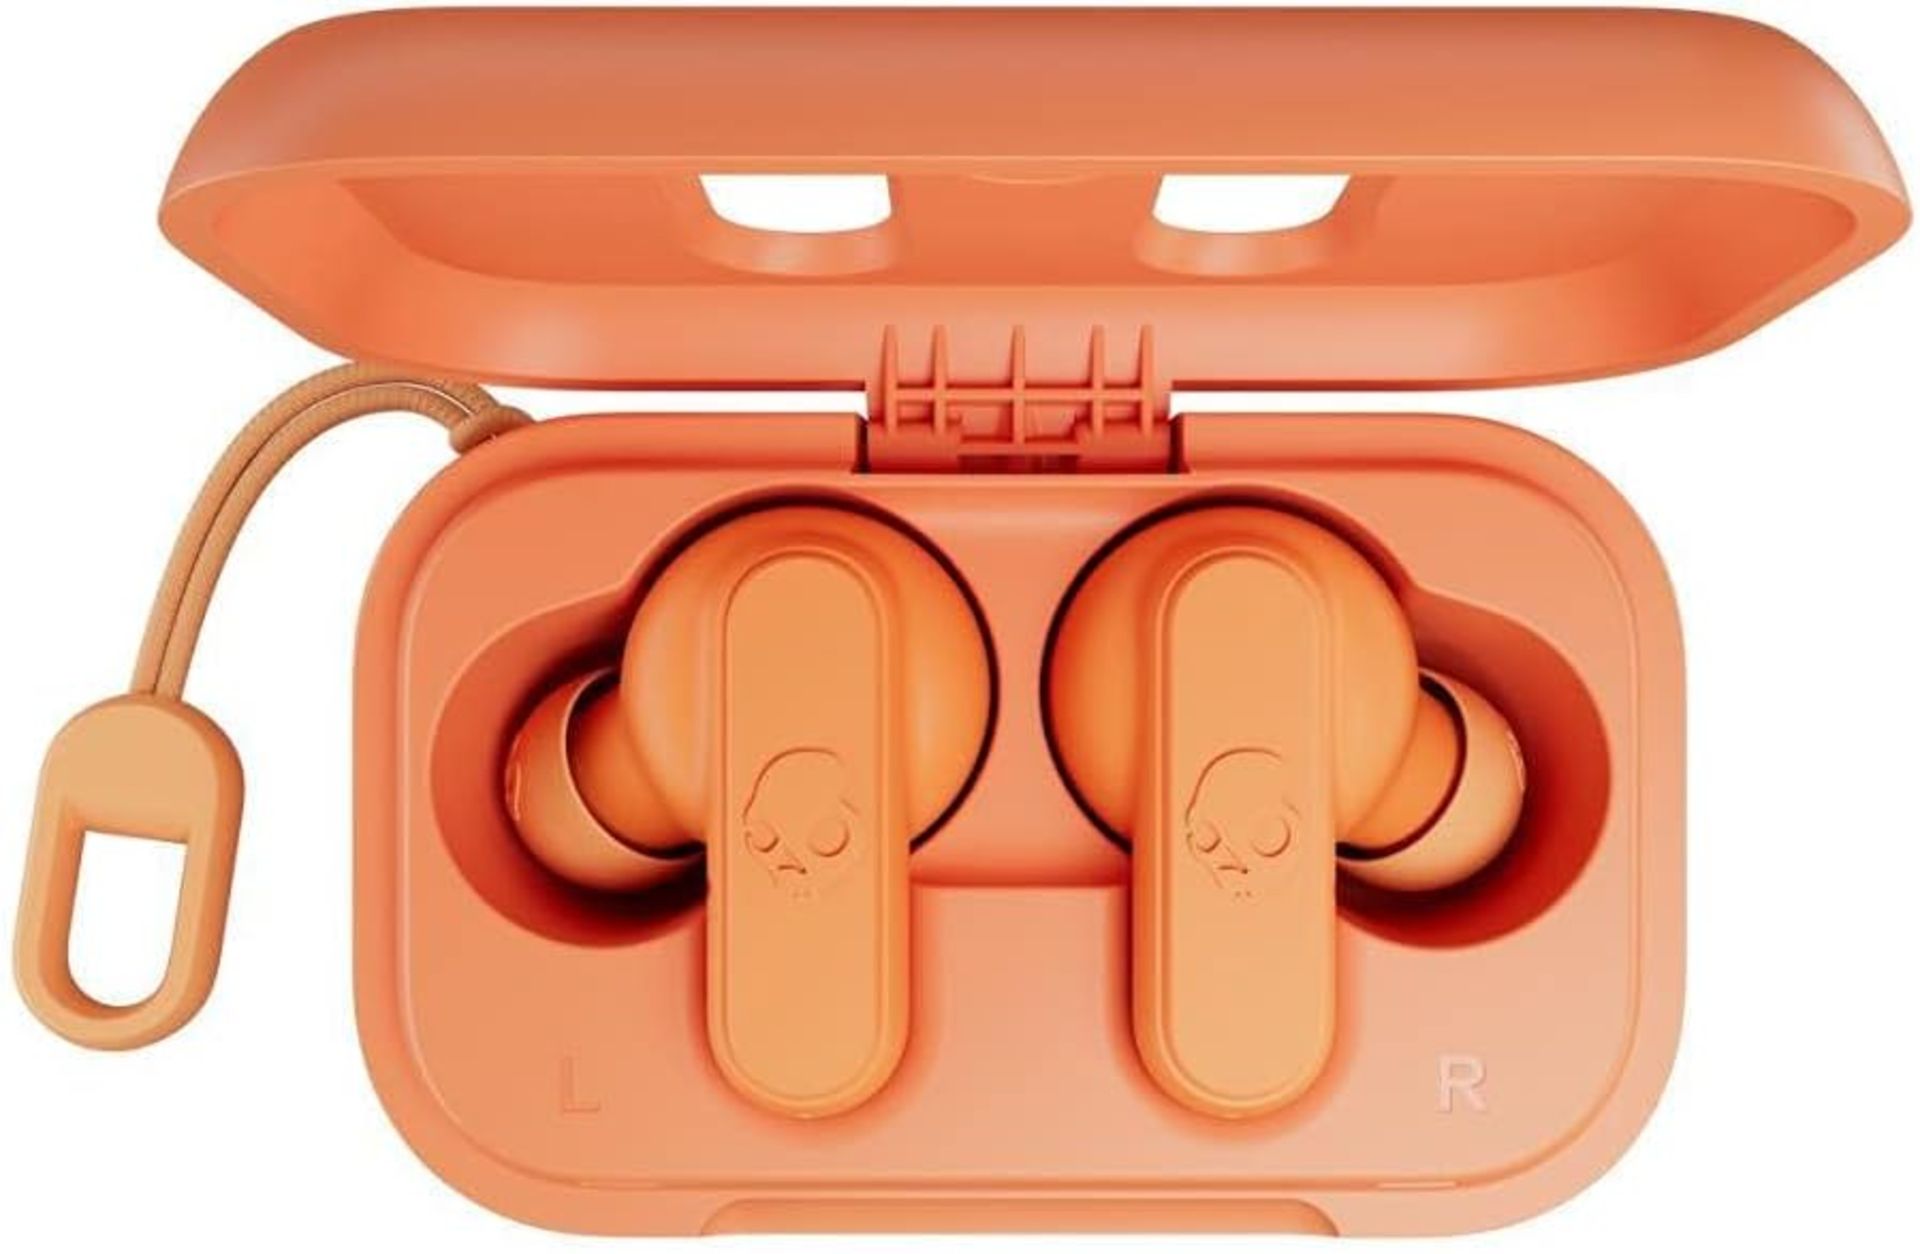 Skullcandy Dime In-Ear Wireless Earbuds, 12 Hr Battery, Microphone, Works with iPhone Android and